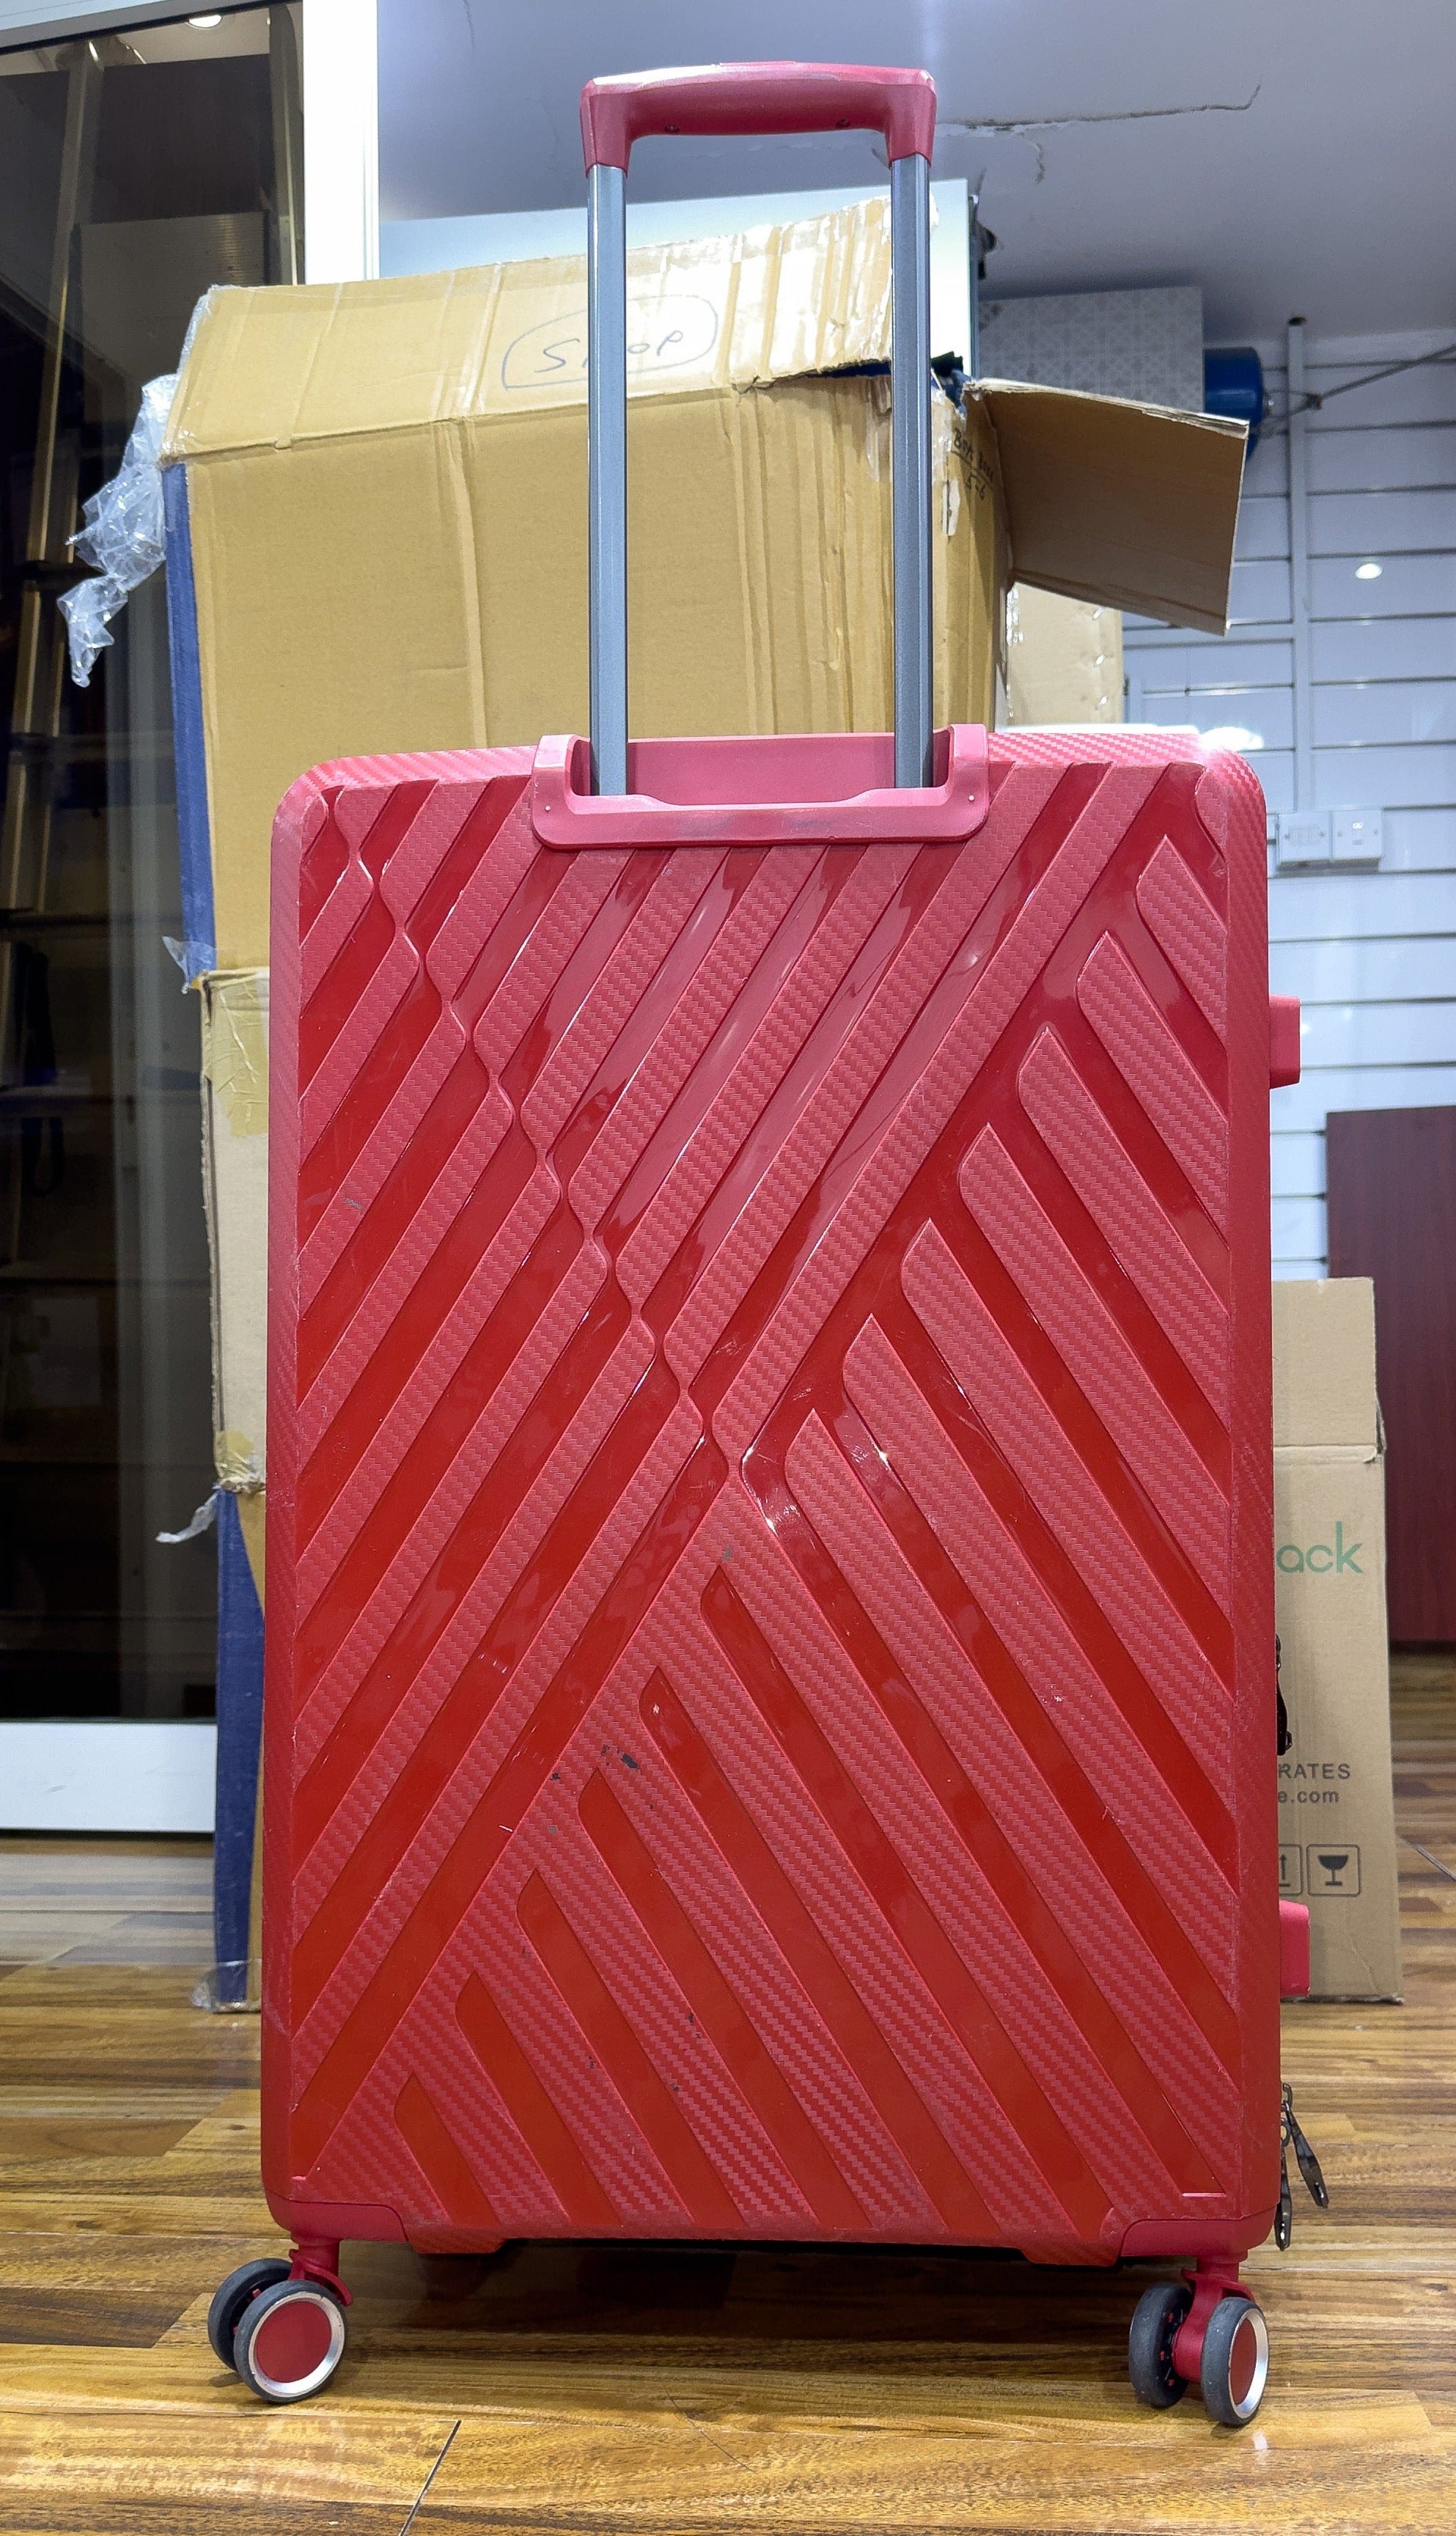 Refurbished Same as New PP Luggage 28 Inch Expandable red Color